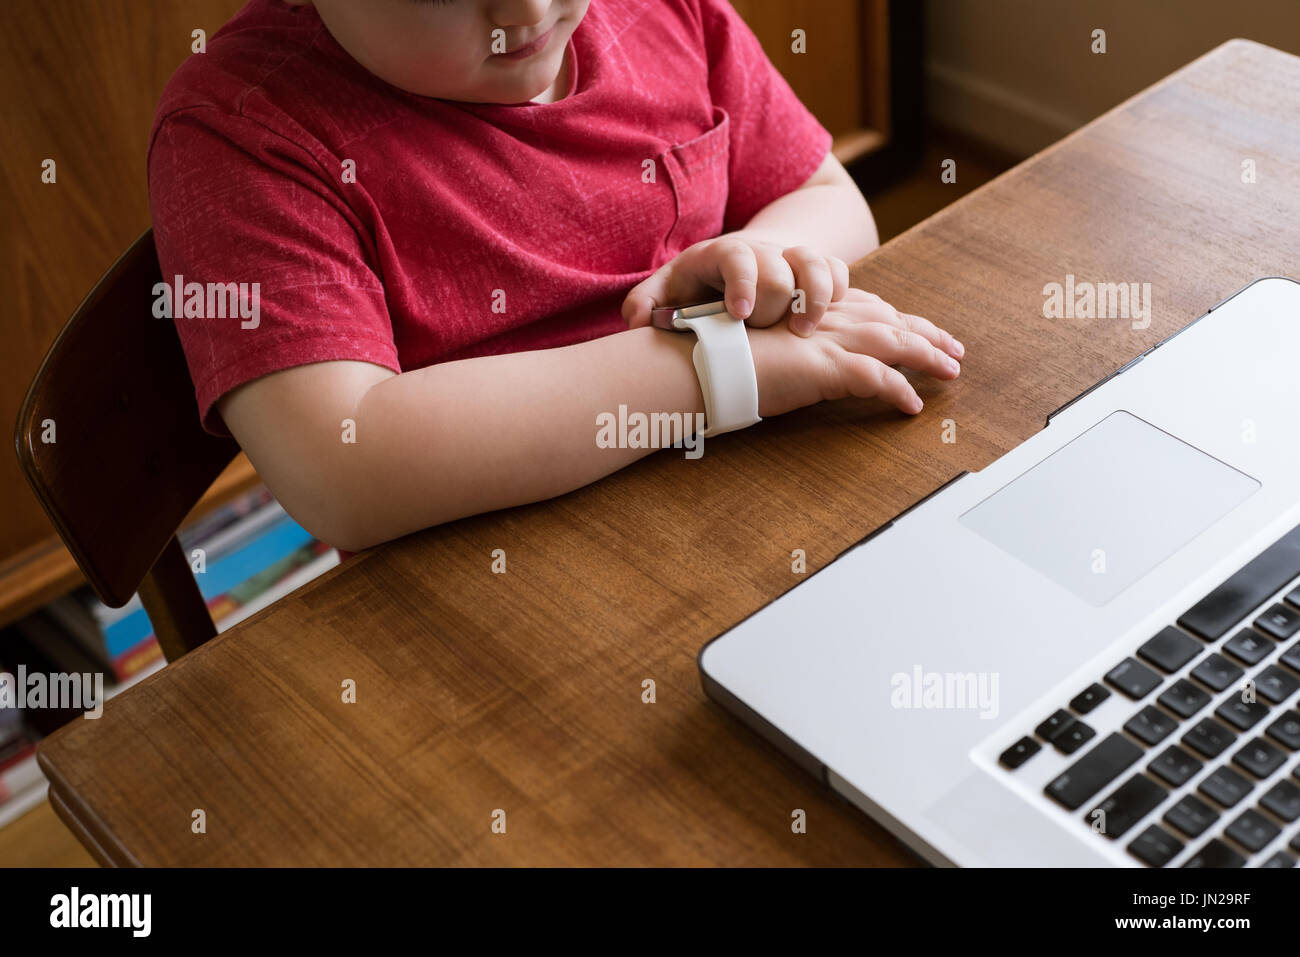 High angle view boy using smart watch while sitting by laptop at table Stock Photo